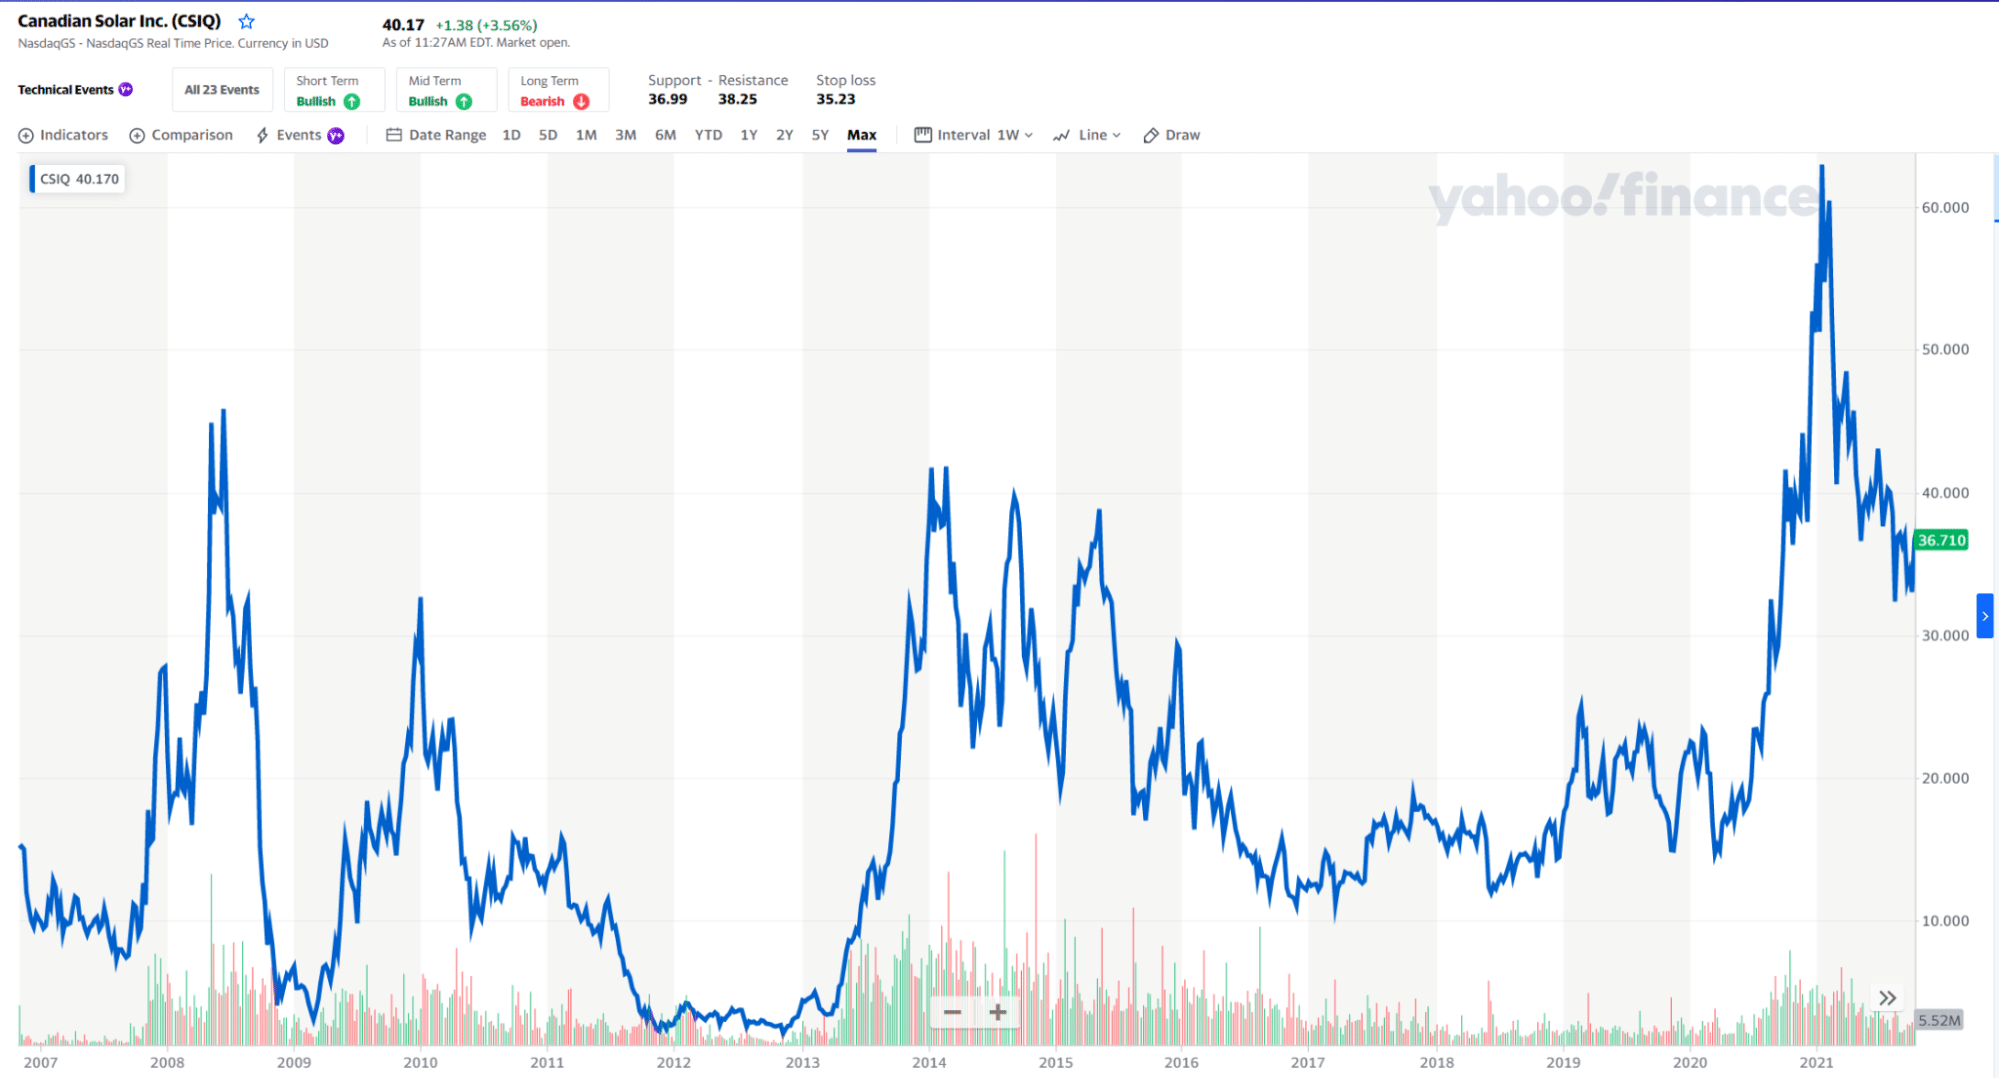 Canadian Solar Inc. had a good start in 2021 but has been falling since